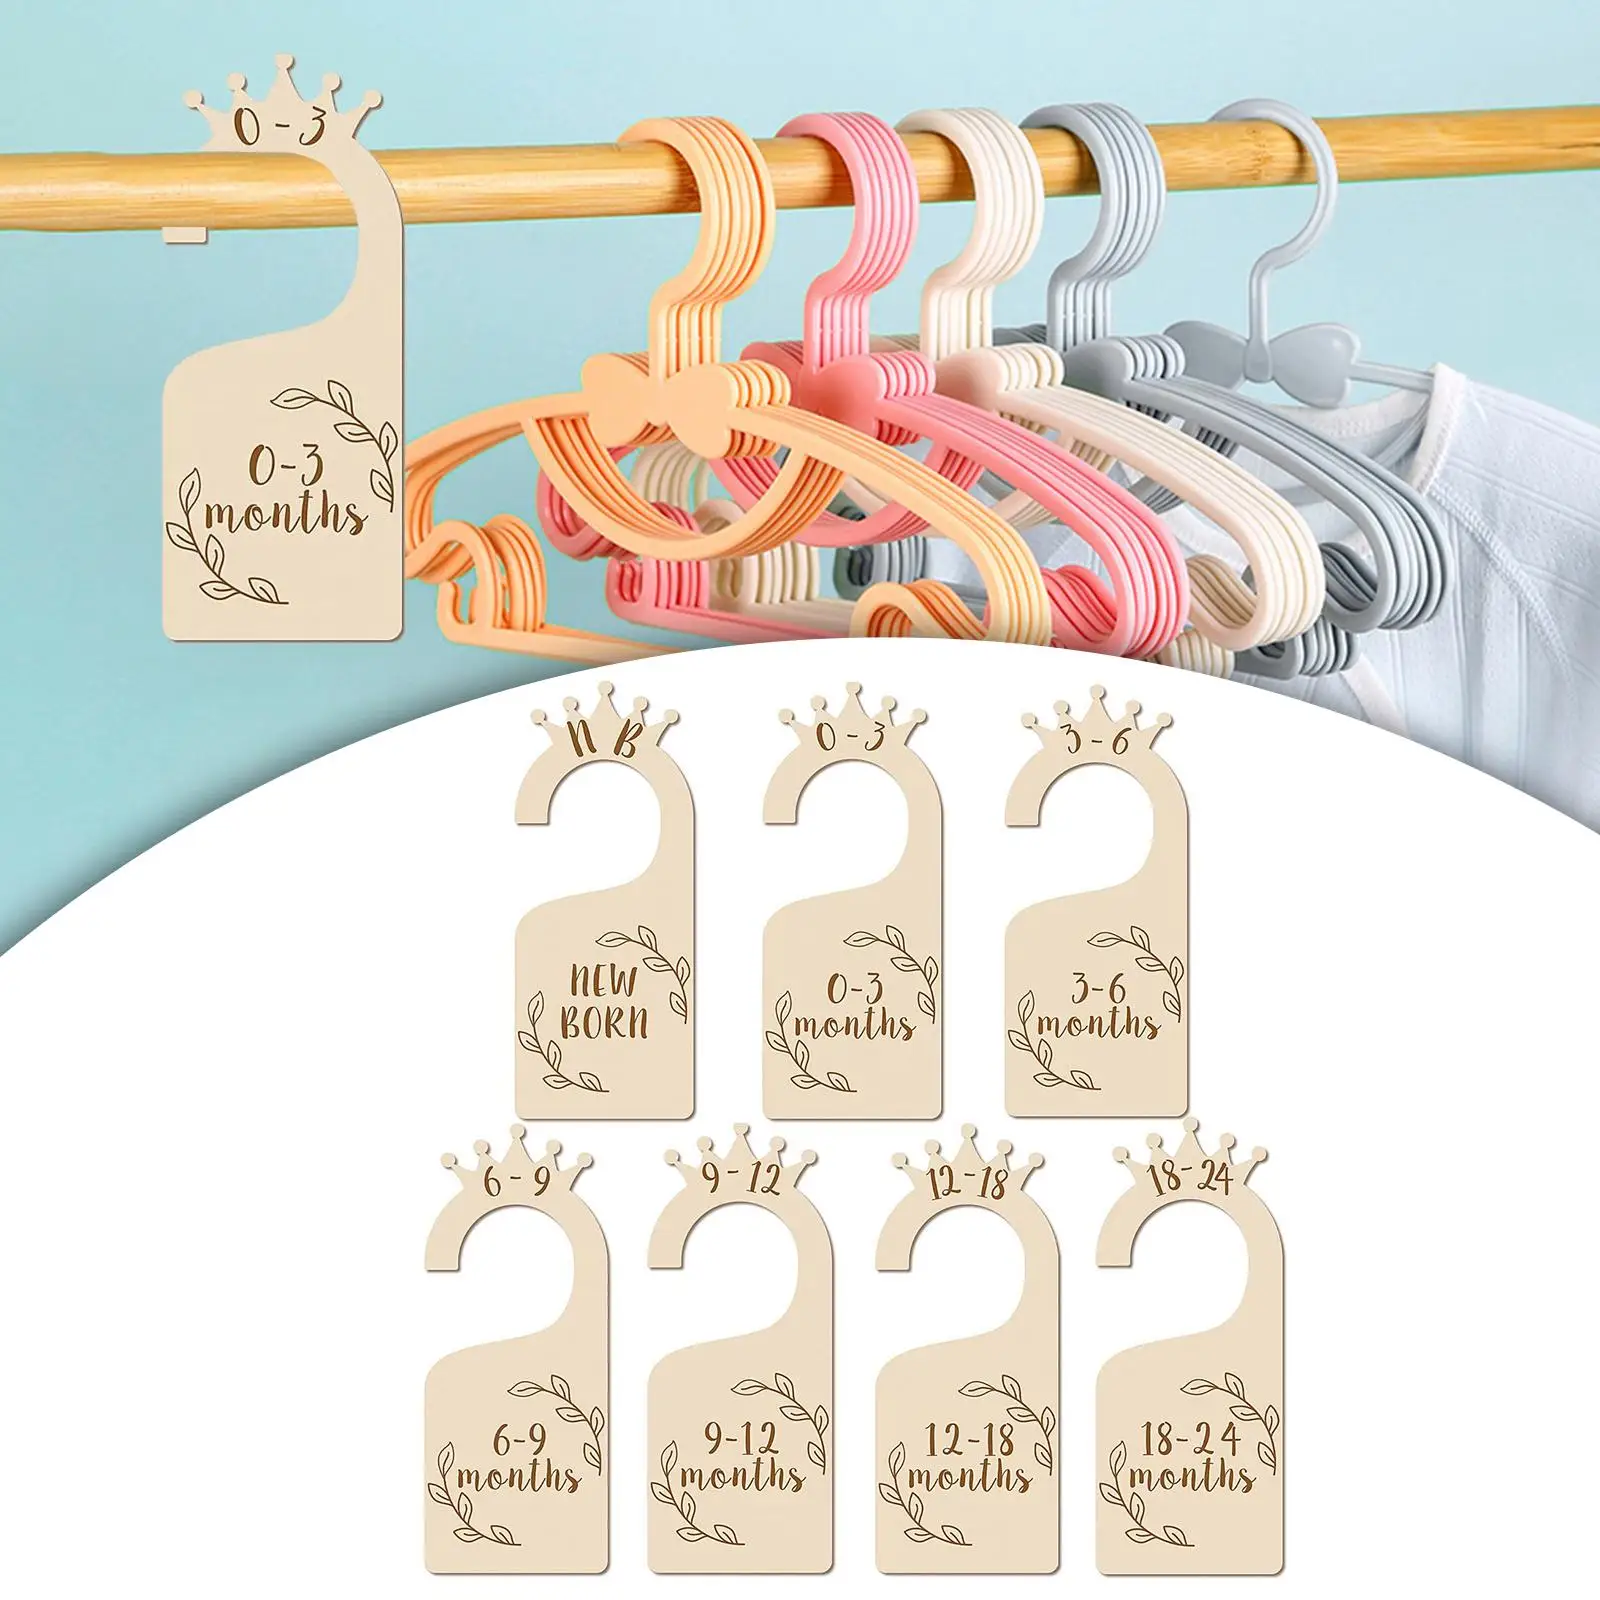 7Pcs Newborn Wardrobe Divider Clothes Organizers Wood for Daily Use